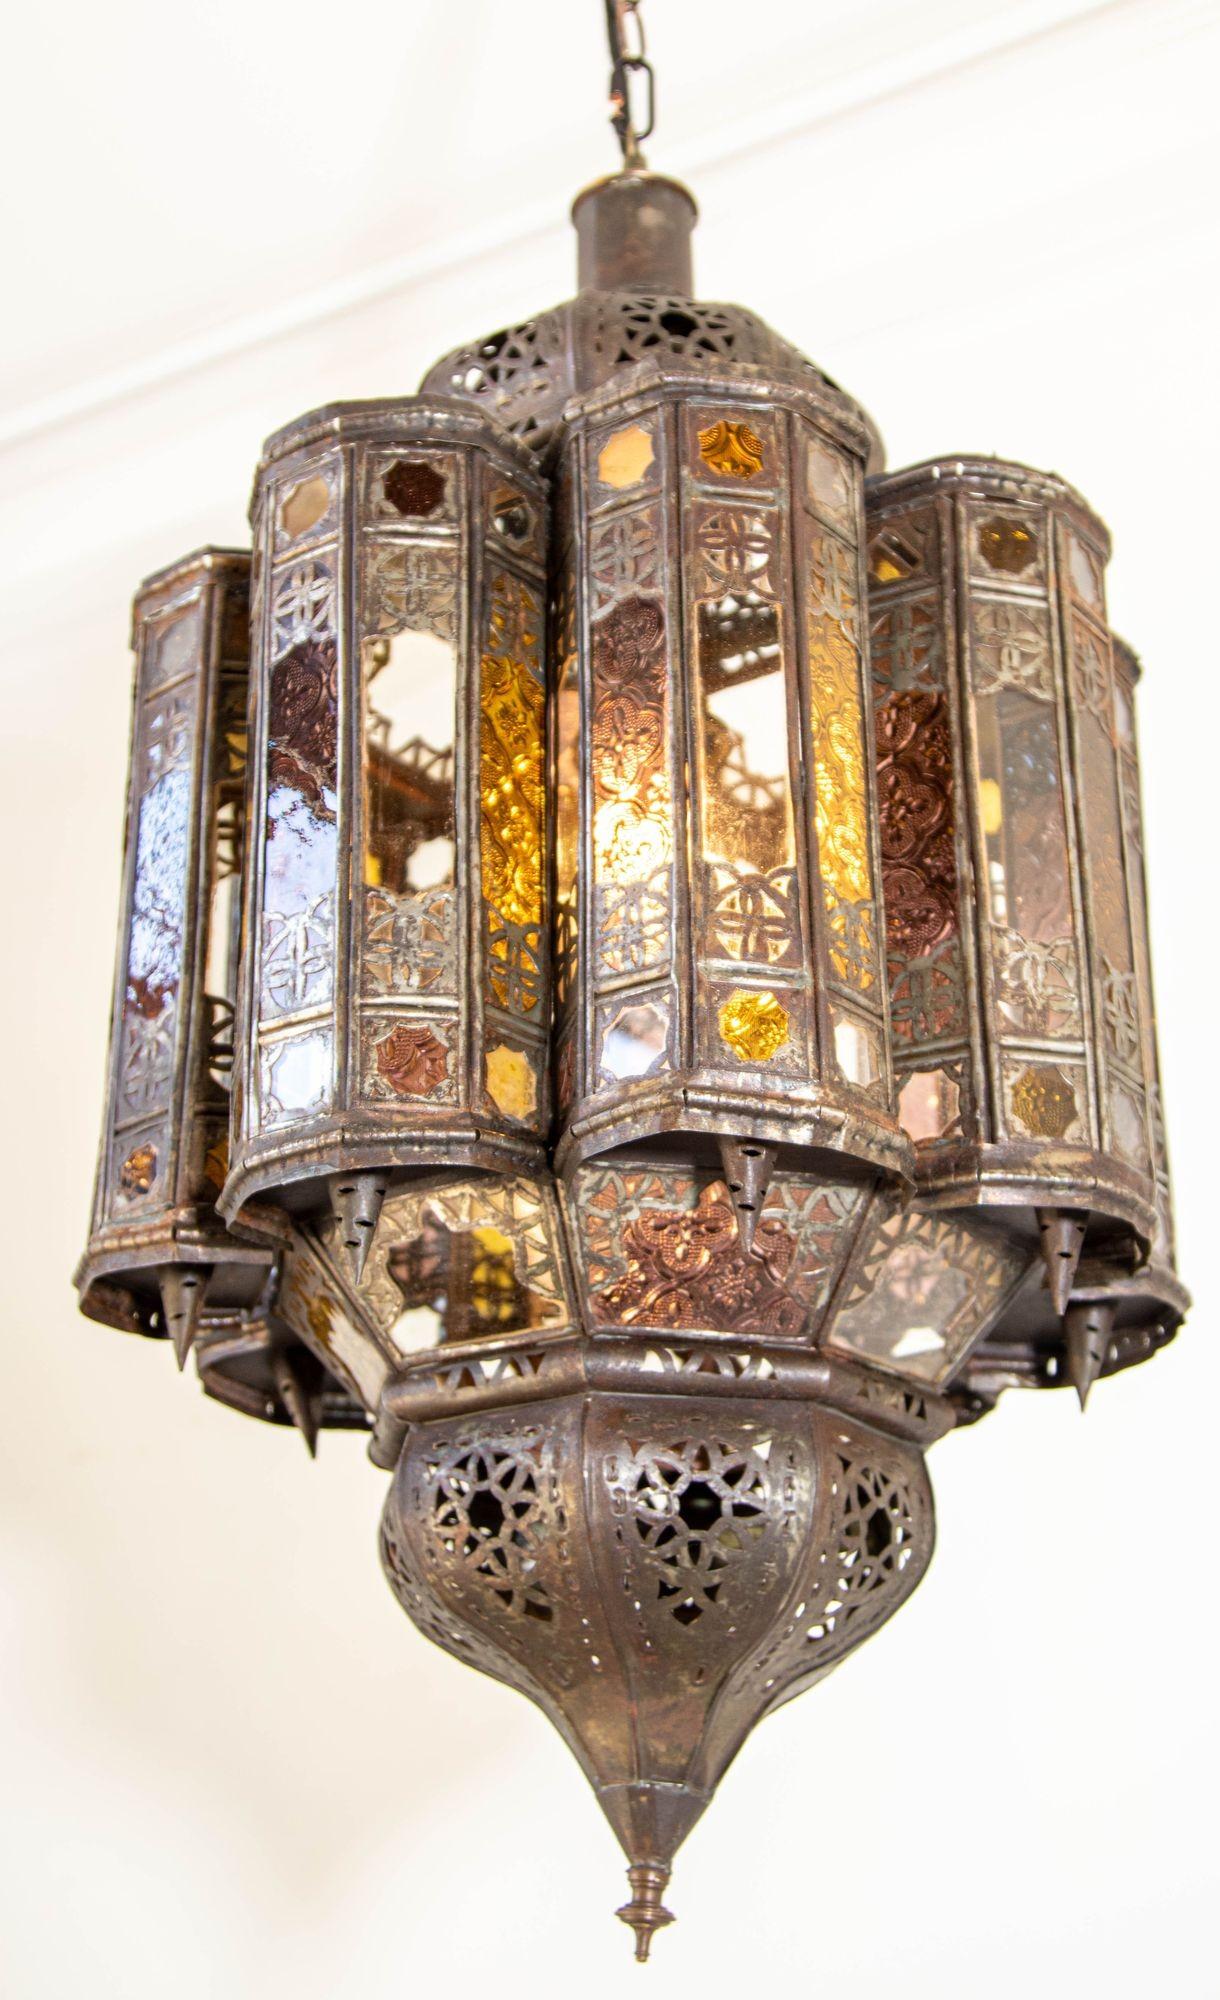 Vintage Moroccan Mamounia Moorish clear glass and multicolor lantern.
Large Moroccan patinated metal and glass lantern, ceiling light Moorish pendant lantern.
Multicolor glass, amber, lavender and clear, multifaceted and intricate filigree Moorish